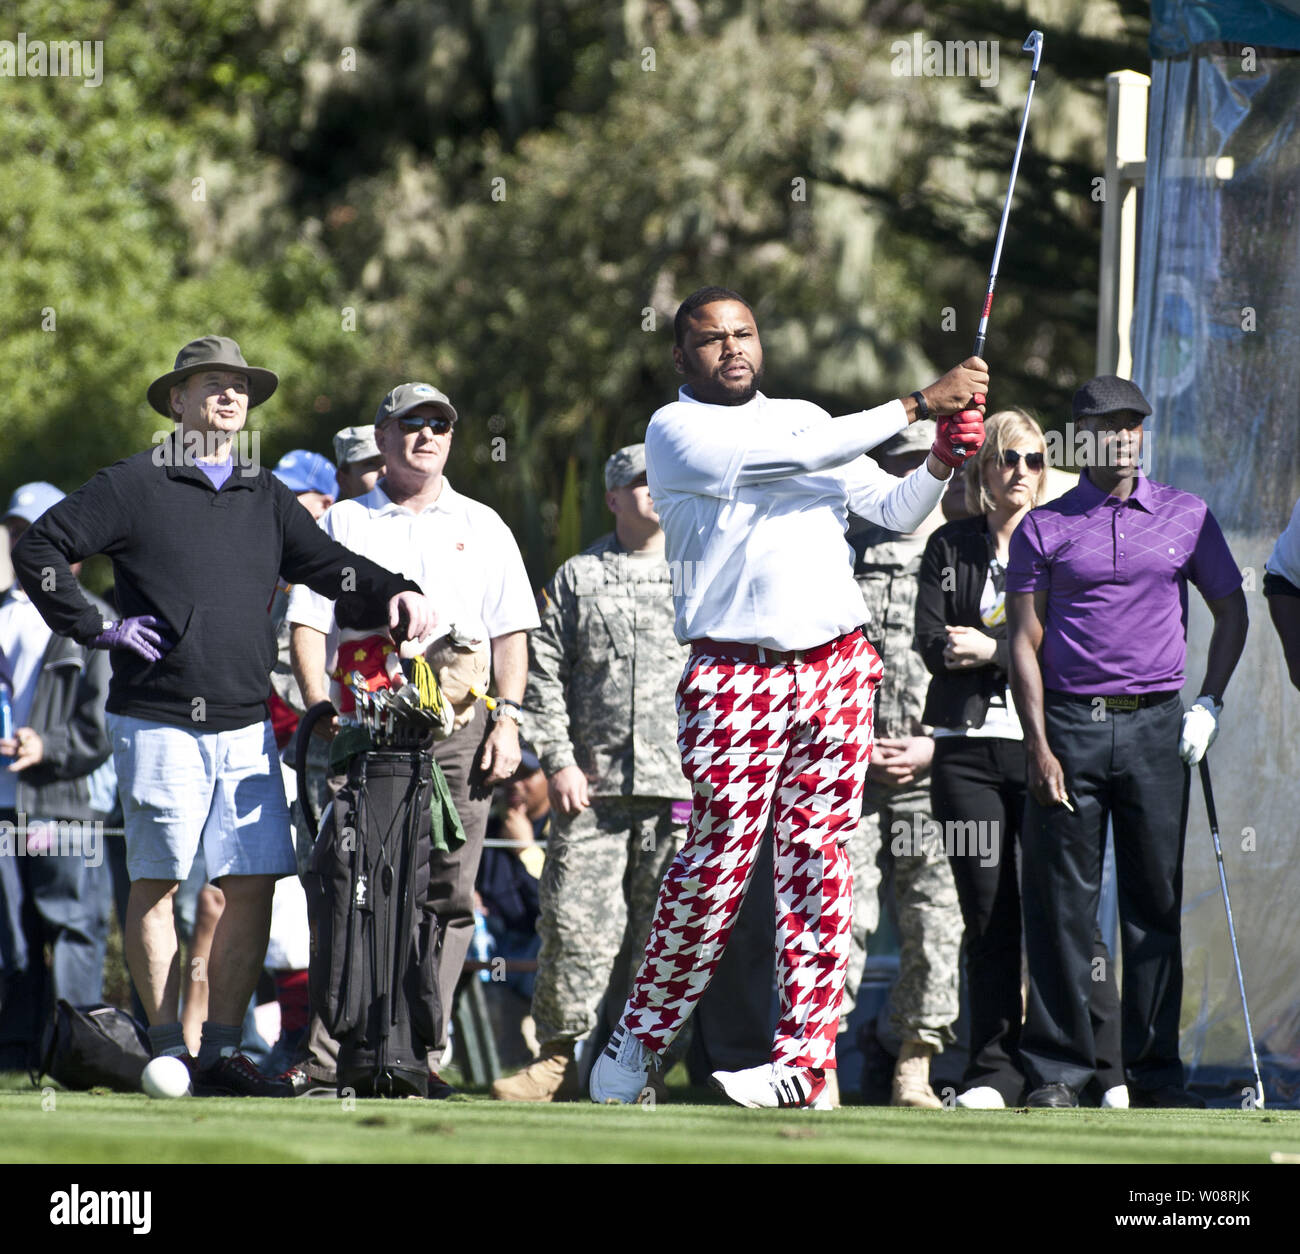 Actor Anthony Anderson tees off on the 17th in the 3M Celebrity Challenge prior to the AT&T Pro-Am at Pebble Beach, California on February 8, 2012.  Bill Murray (L) and Don Cheadle (R) watch. UPI/Terry Schmitt Stock Photo